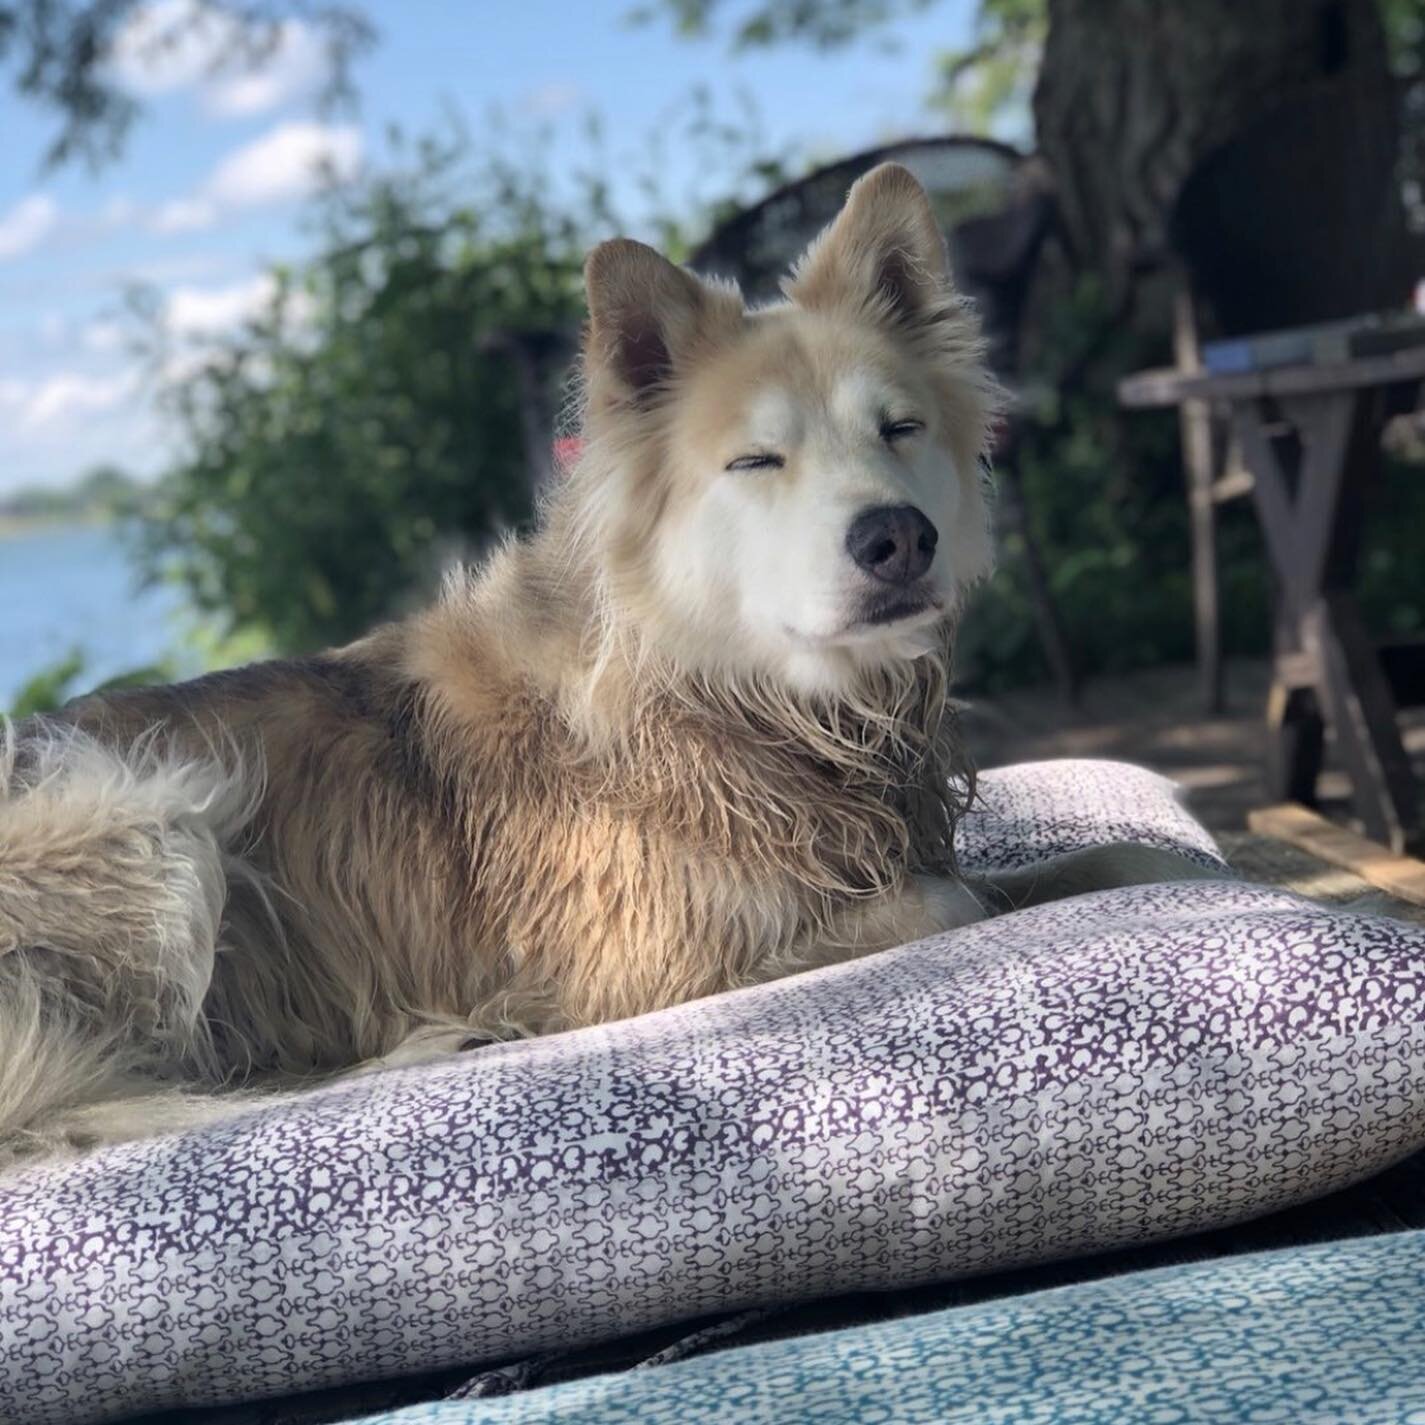 While we have been calling these DOCK beds.....seems others would beg to differ!! 

#summeriscoming #adoptdontshop #handblockprint #cotton #linen #madeintoronto #cottagestyle #rescuedogsofinstagram